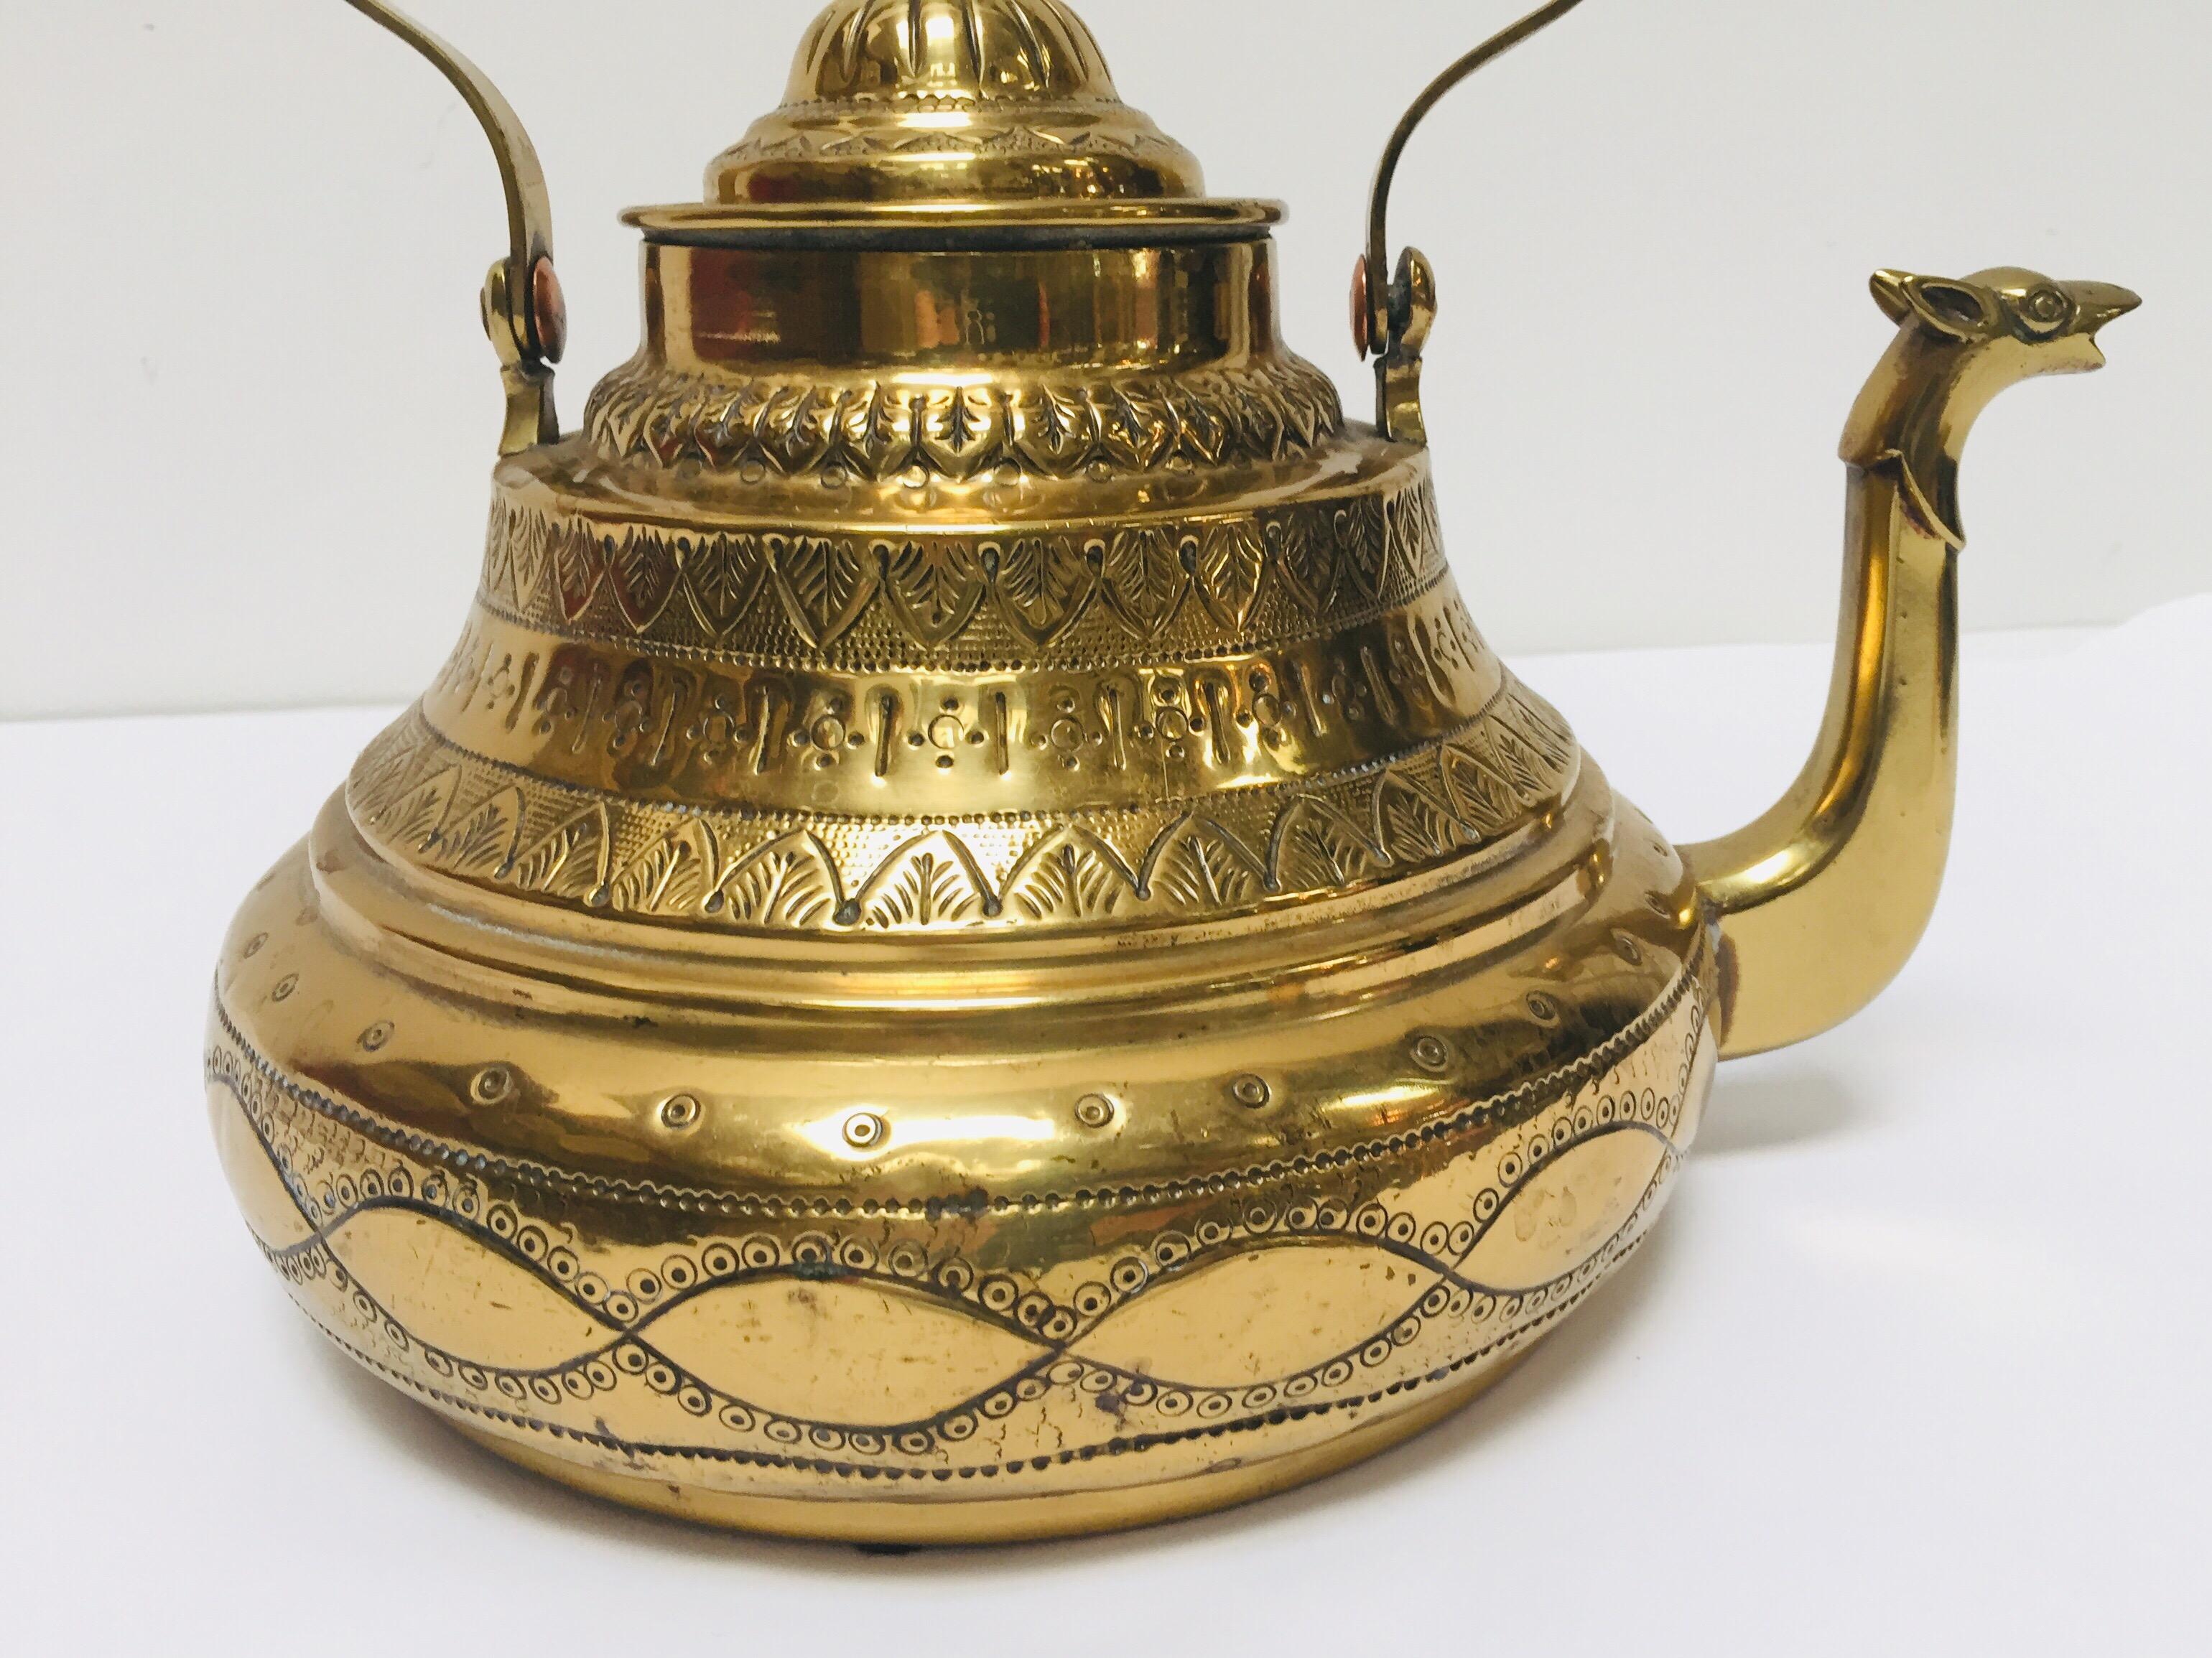 Moroccan antique brass tea kettle pot with camel head spout
Museum quality, one of a kind antique artistically and delicately handcrafted tea water pot.
Camel shape water kettle in solid brass, hand-hammered, chased, engraved with floral and